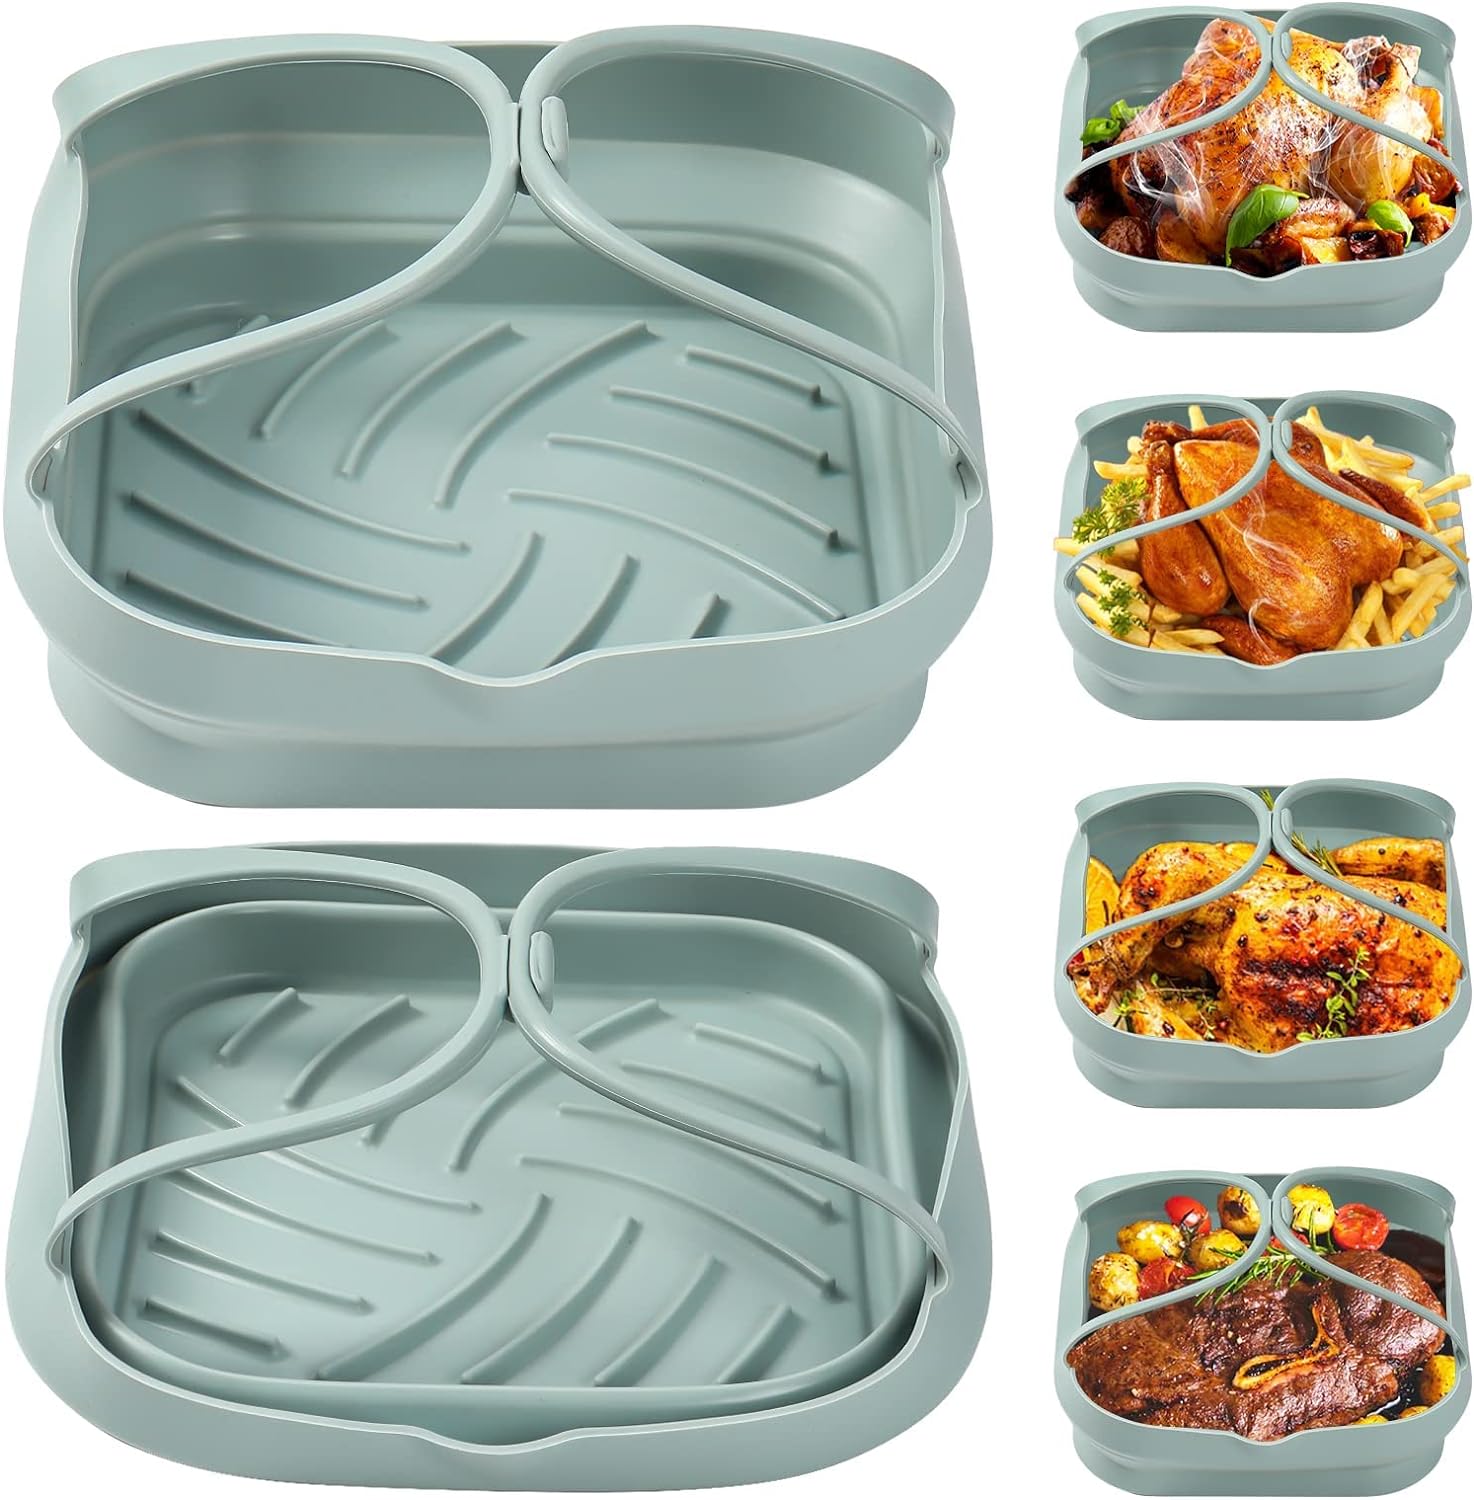 Air fryer silicone liners wholesale - HB Silicone